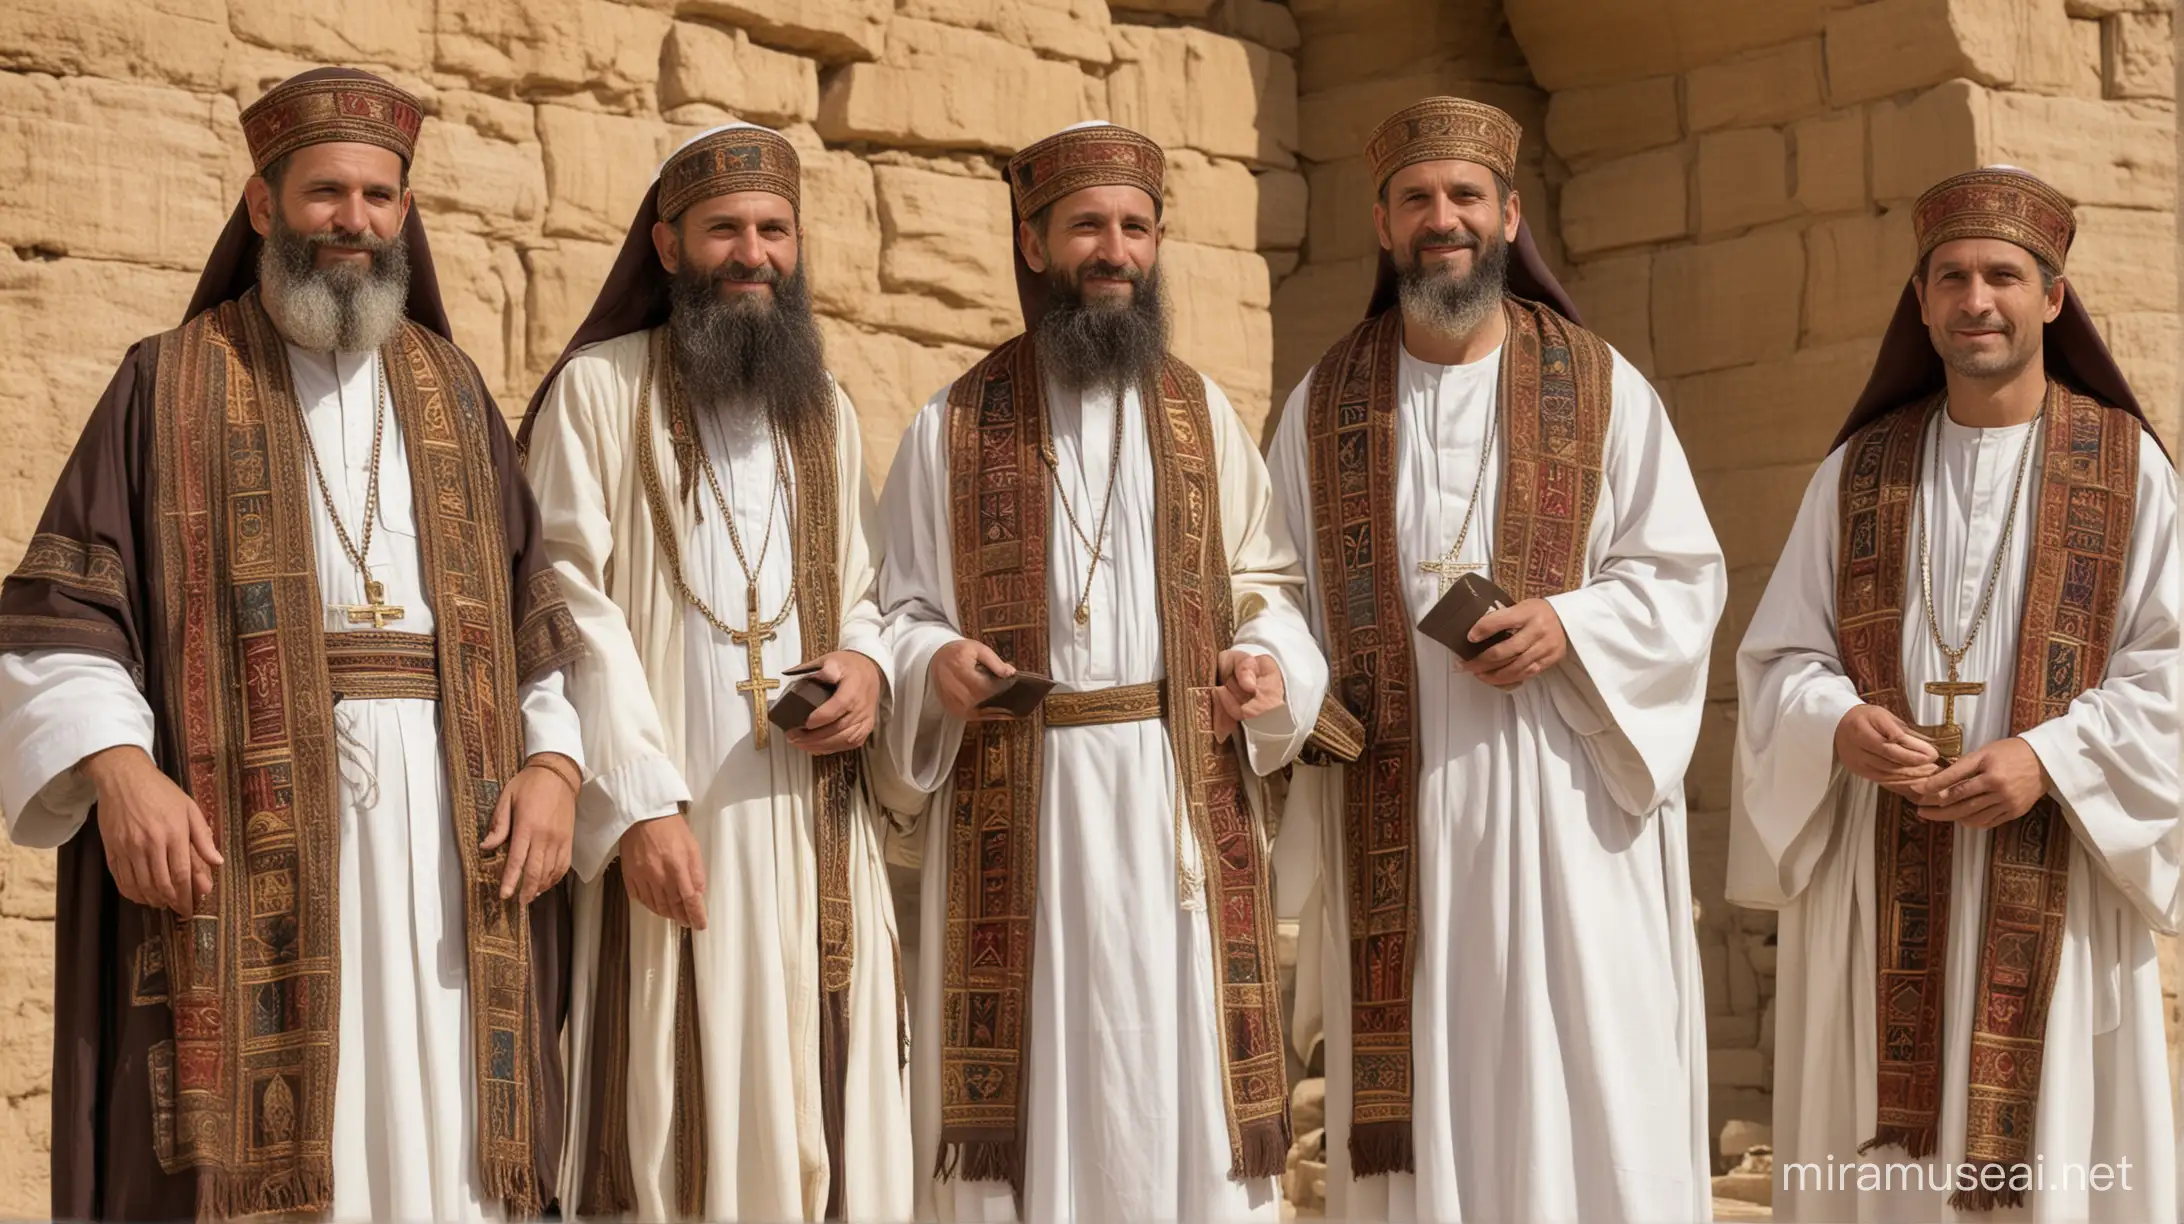 Levitical priests in their thirties and fourties from moses era